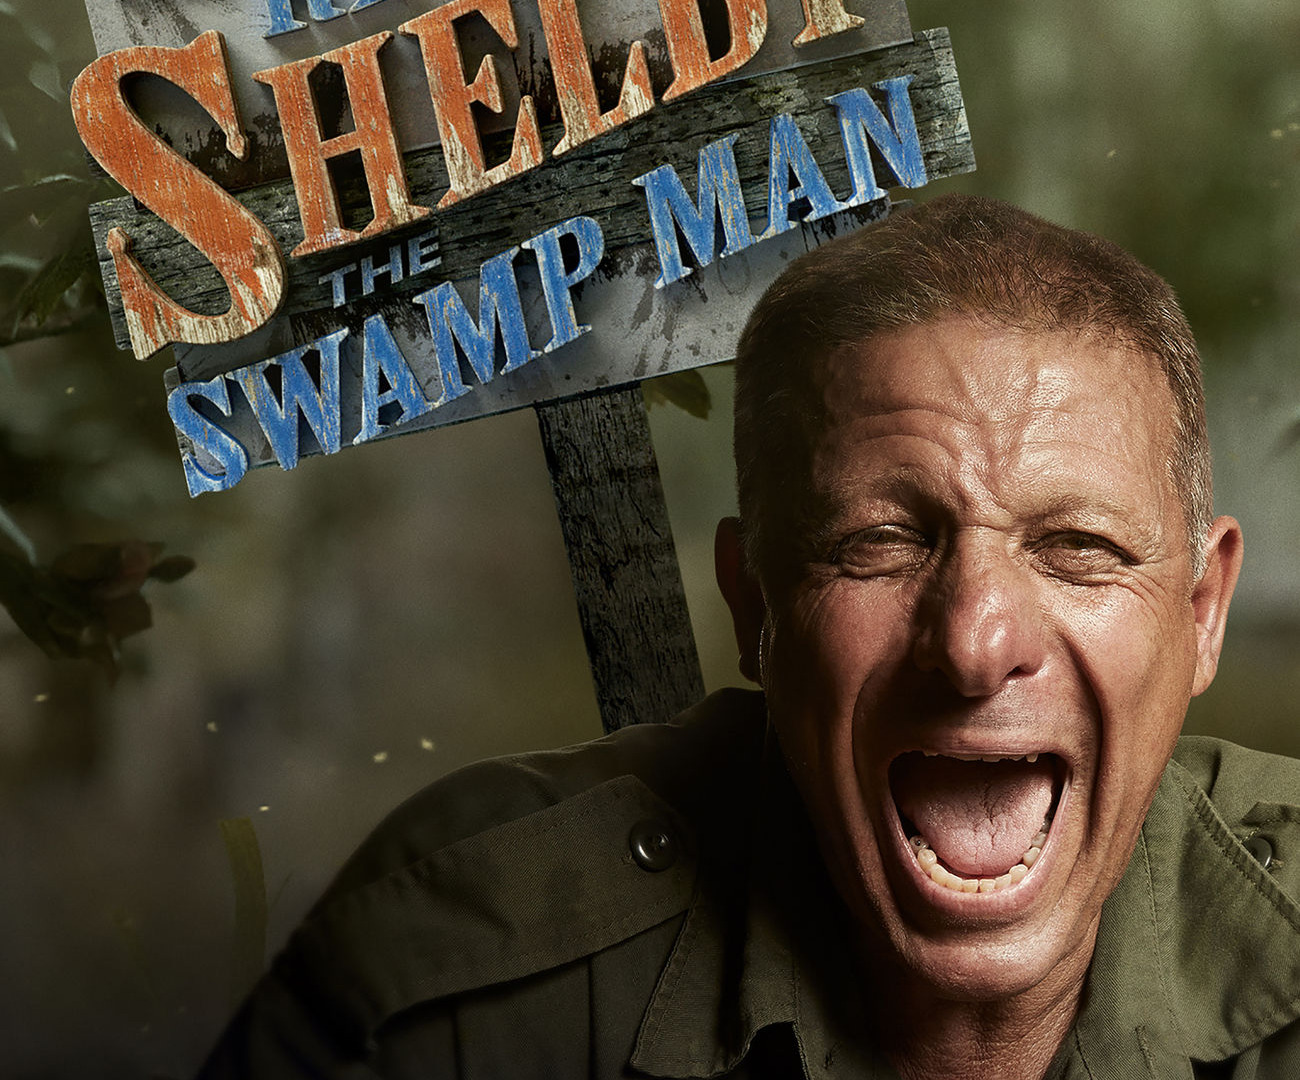 Show The Return of Shelby the Swamp Man